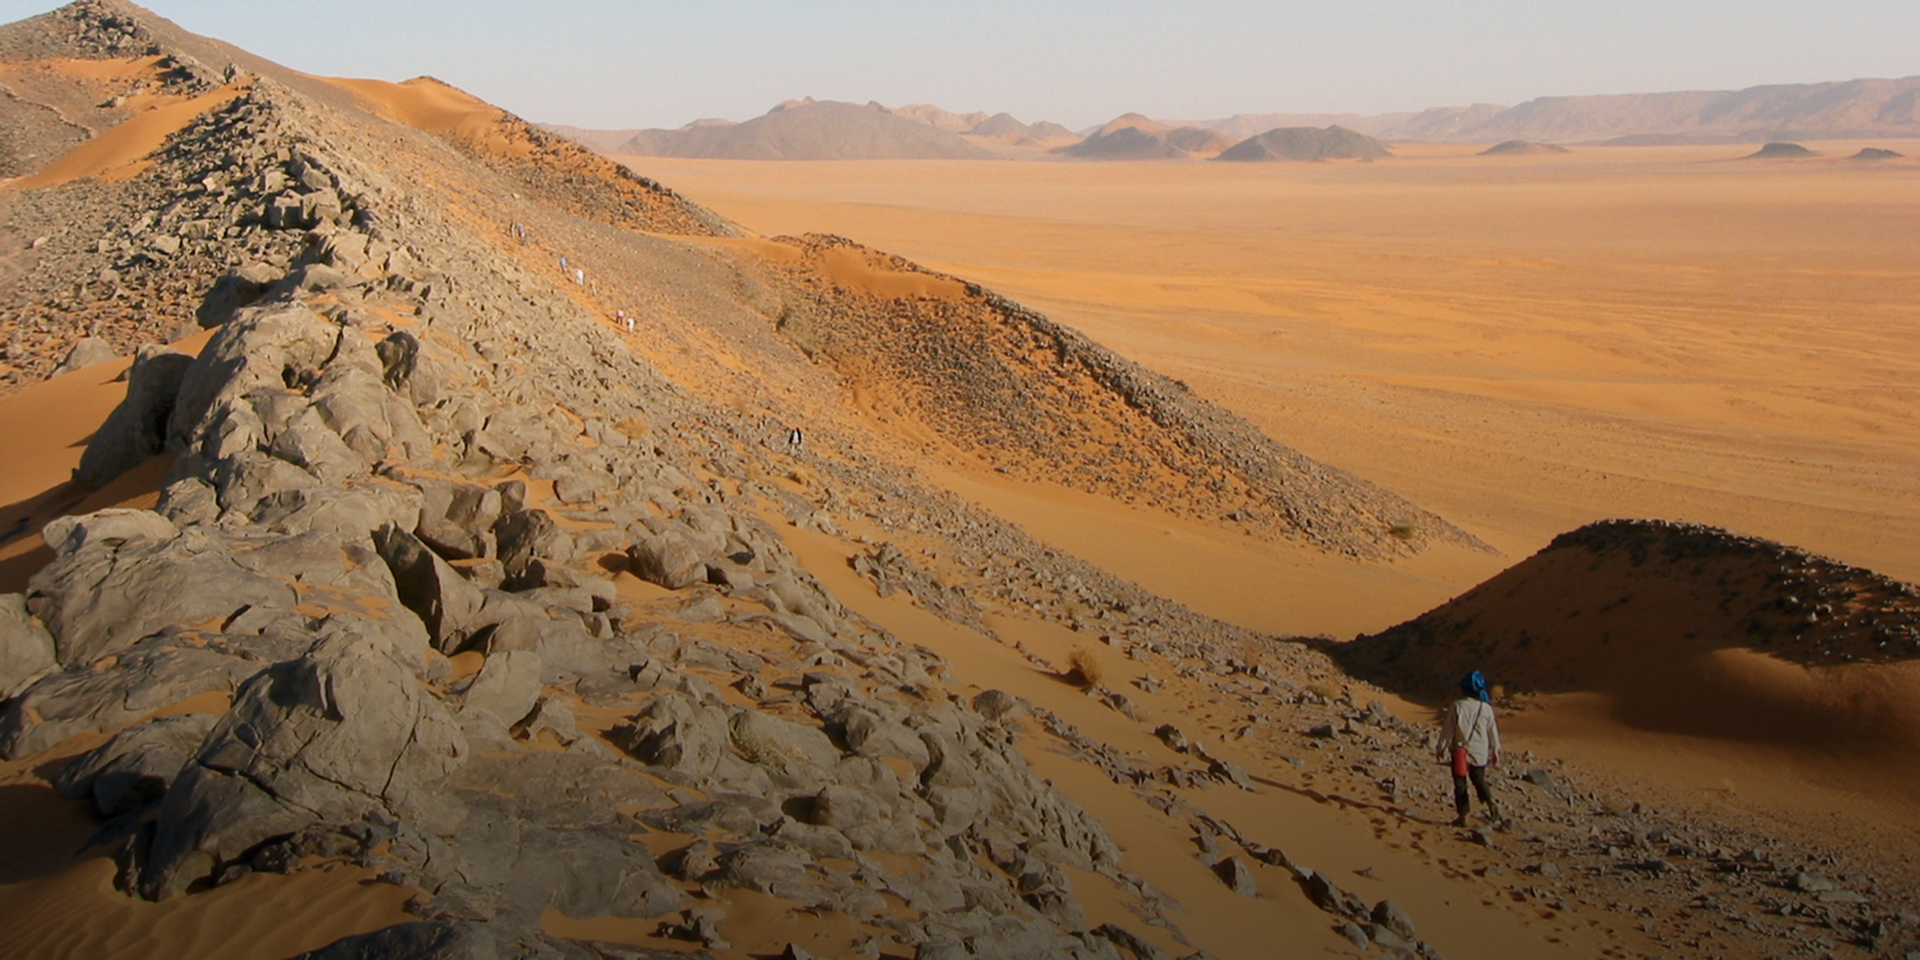 A mountainous desert with hills in the distance. A line of people can be seen walking along the base of a hill.